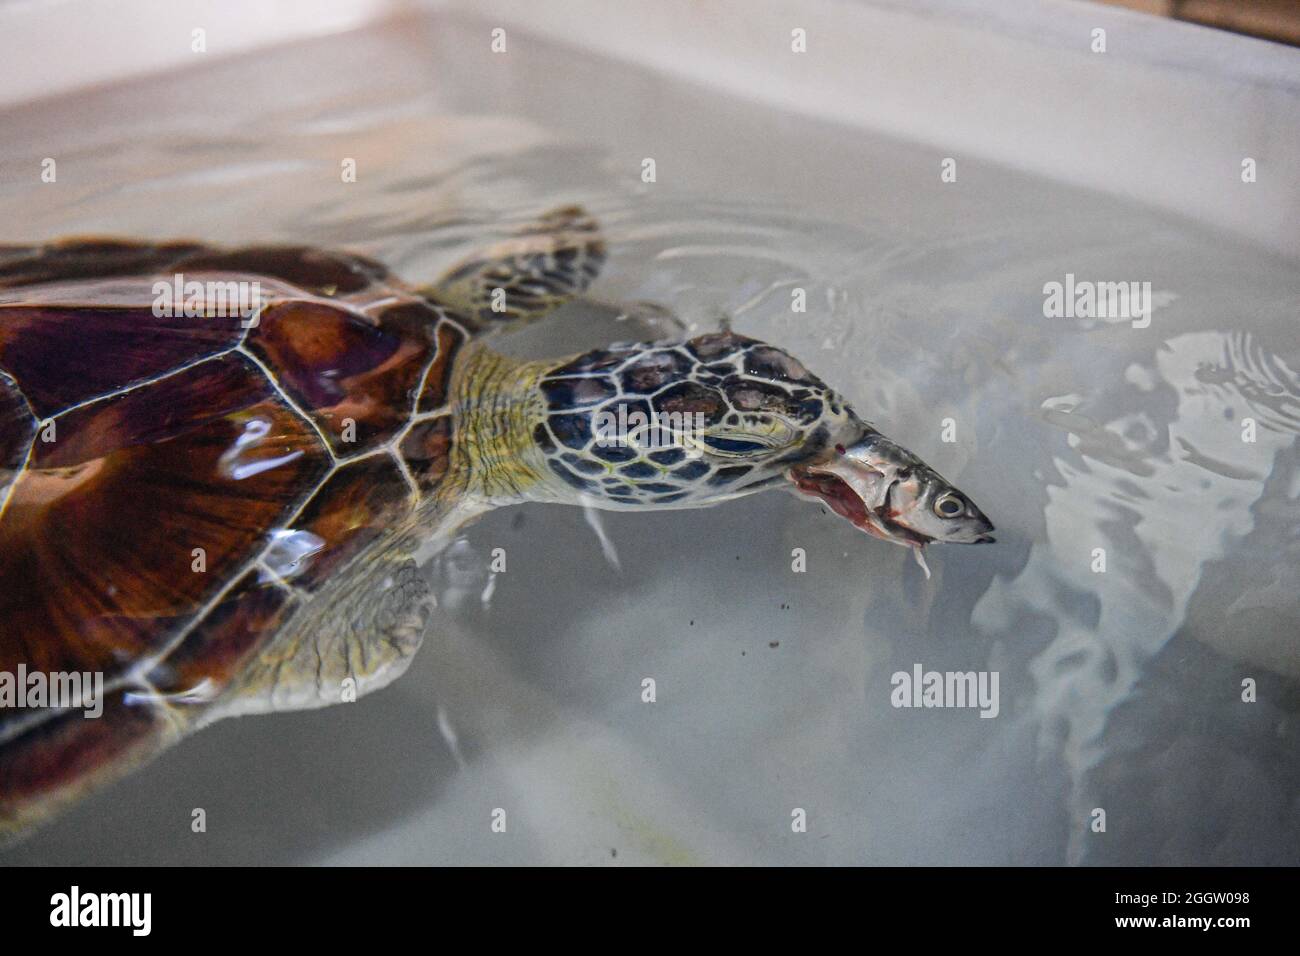 (210903) -- HAIKOU, Sept. 3, 2021 (Xinhua) -- A turtle feeds on a fish at the 'turtle first-aid station' in Hainan Normal University in Haikou, south China's Hainan Province, on Aug. 27, 2021.  Founded in 2013, the 'turtle first-aid station' in Hainan Normal University has been devoted to helping turtles in need and raising people's awareness of turtle protection.  Run by more than 30 volunteers of biology and related majors across the university, this station cures and rehabilitates turtles.    The volunteers said they feel well paid for their arduous work when they watch fully recovered turt Stock Photo